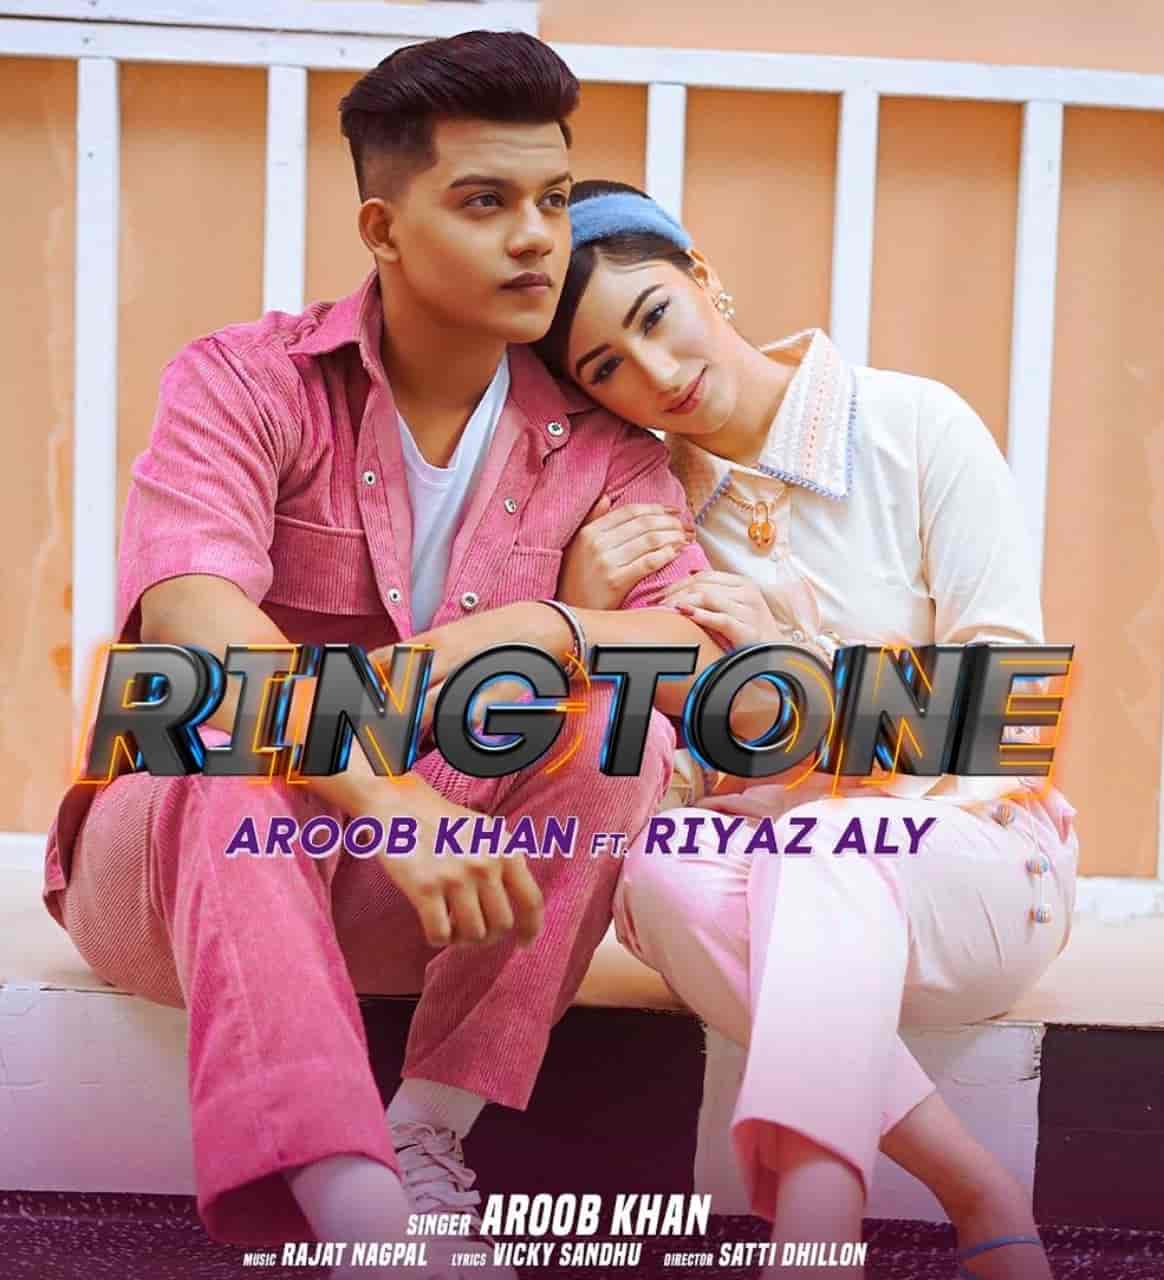 Ringtone Song Image Features Aroob Khan And Riyaz Aly